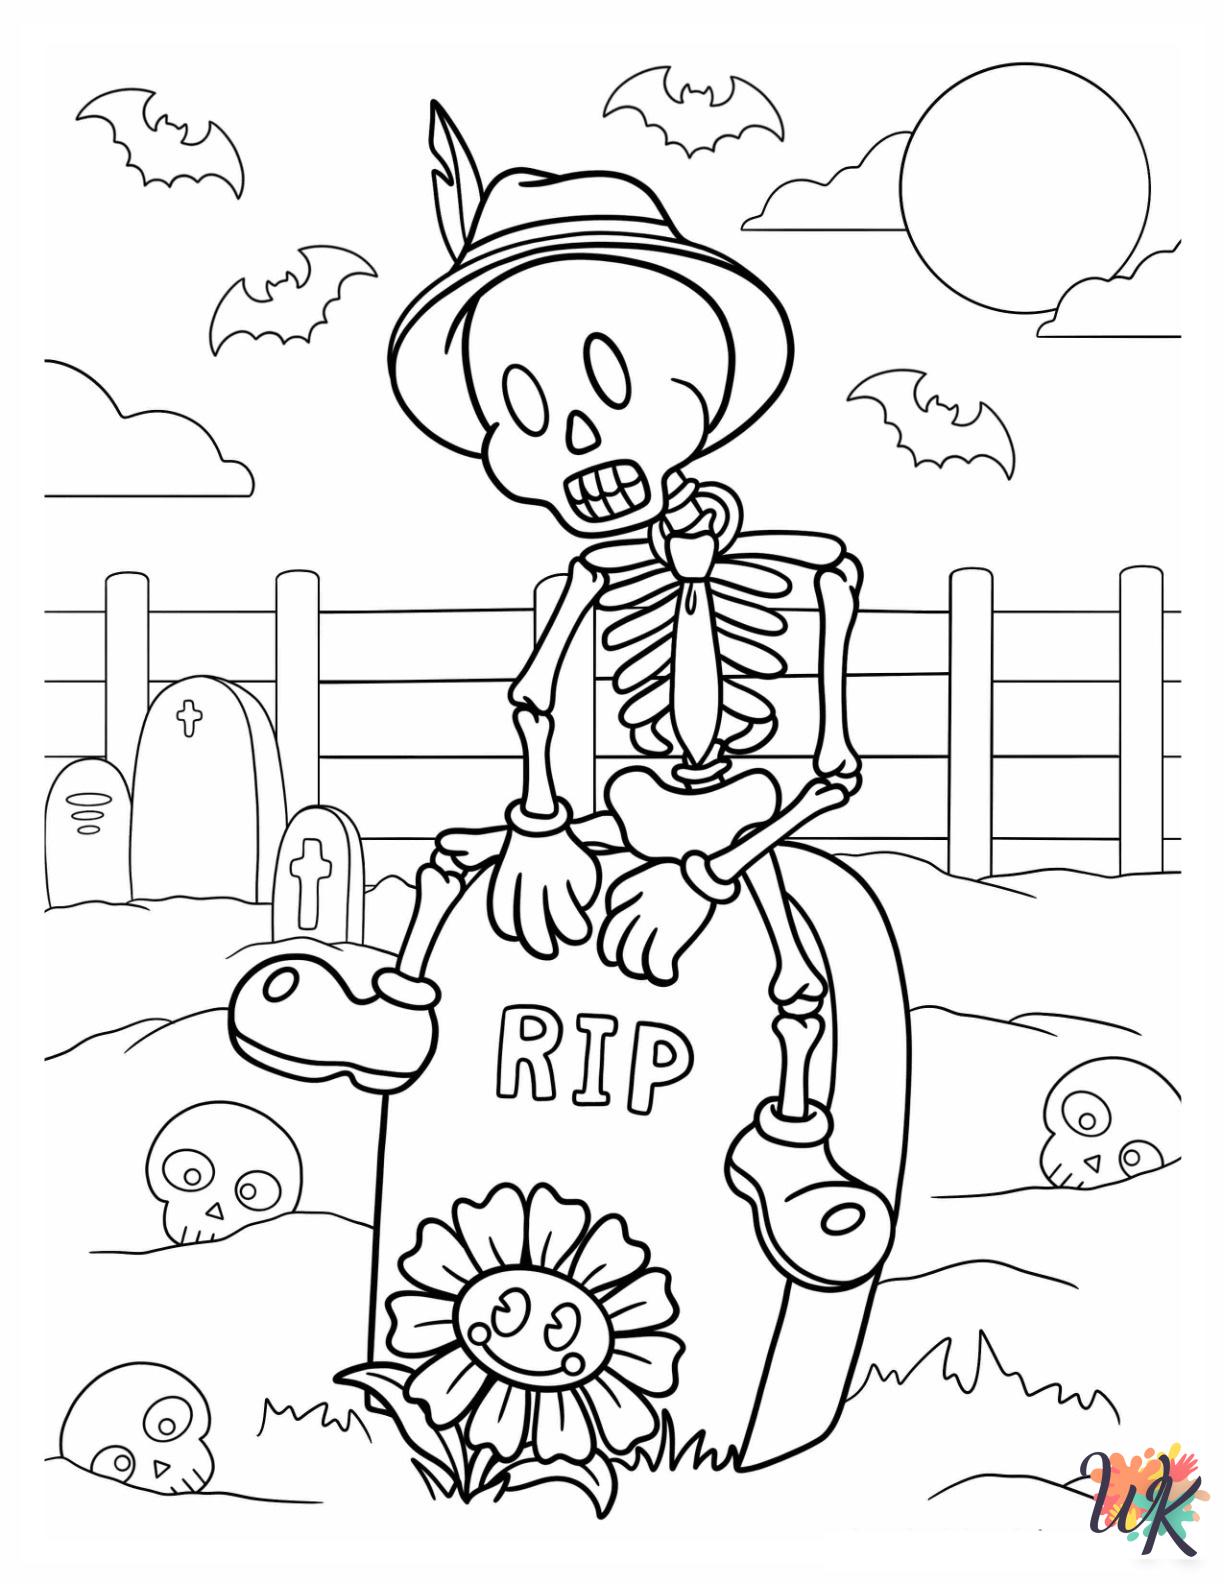 Skeleton coloring pages printable